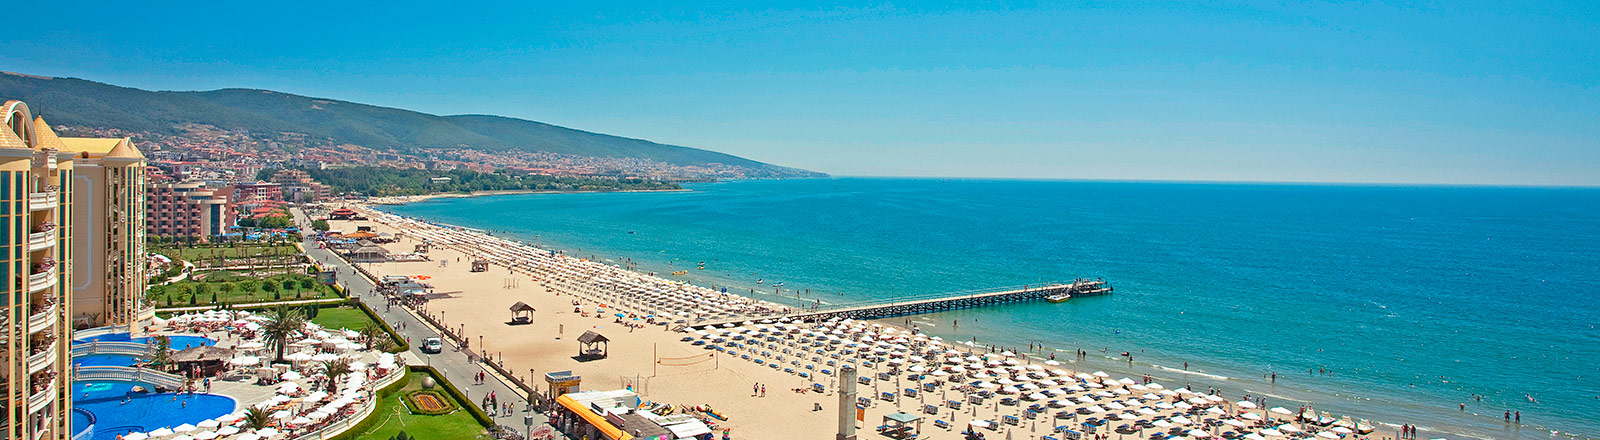 Top 5 Things to See & Do in Sunny Beach